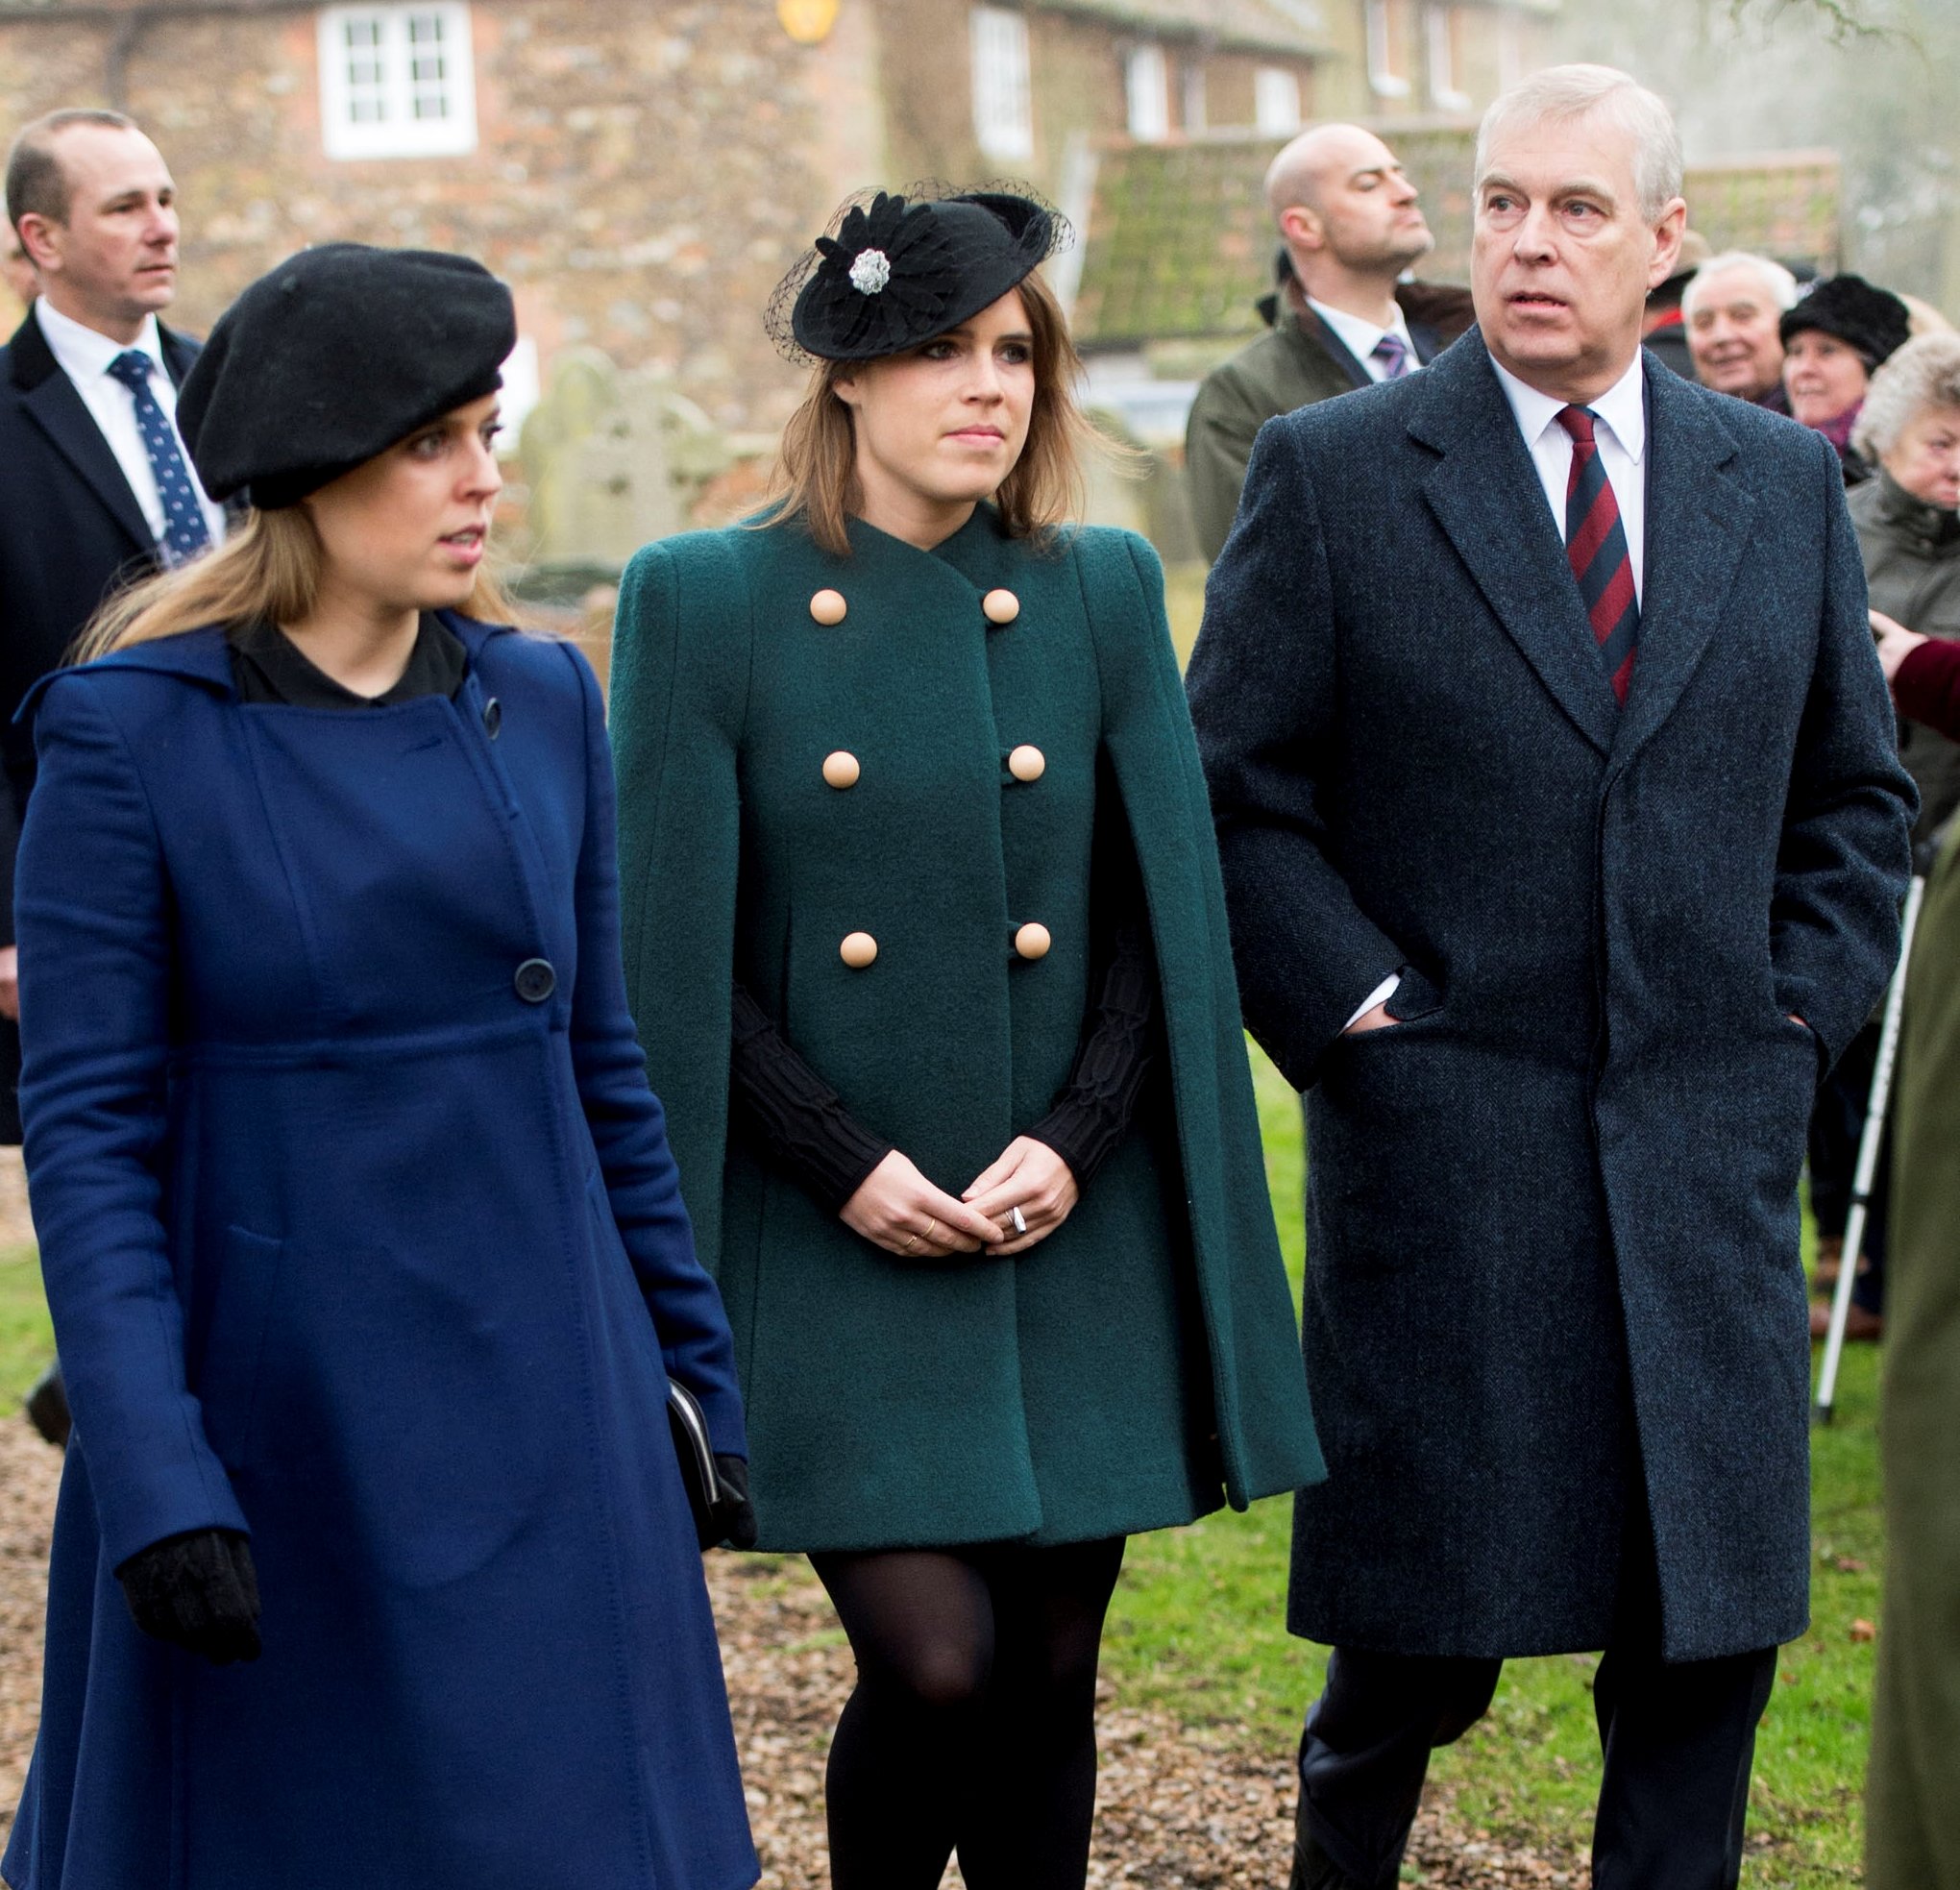 Princess Eugenie and Princess Beatrice standing with their father, Prince Andrew, at St. Lawrence Church in Sandringham